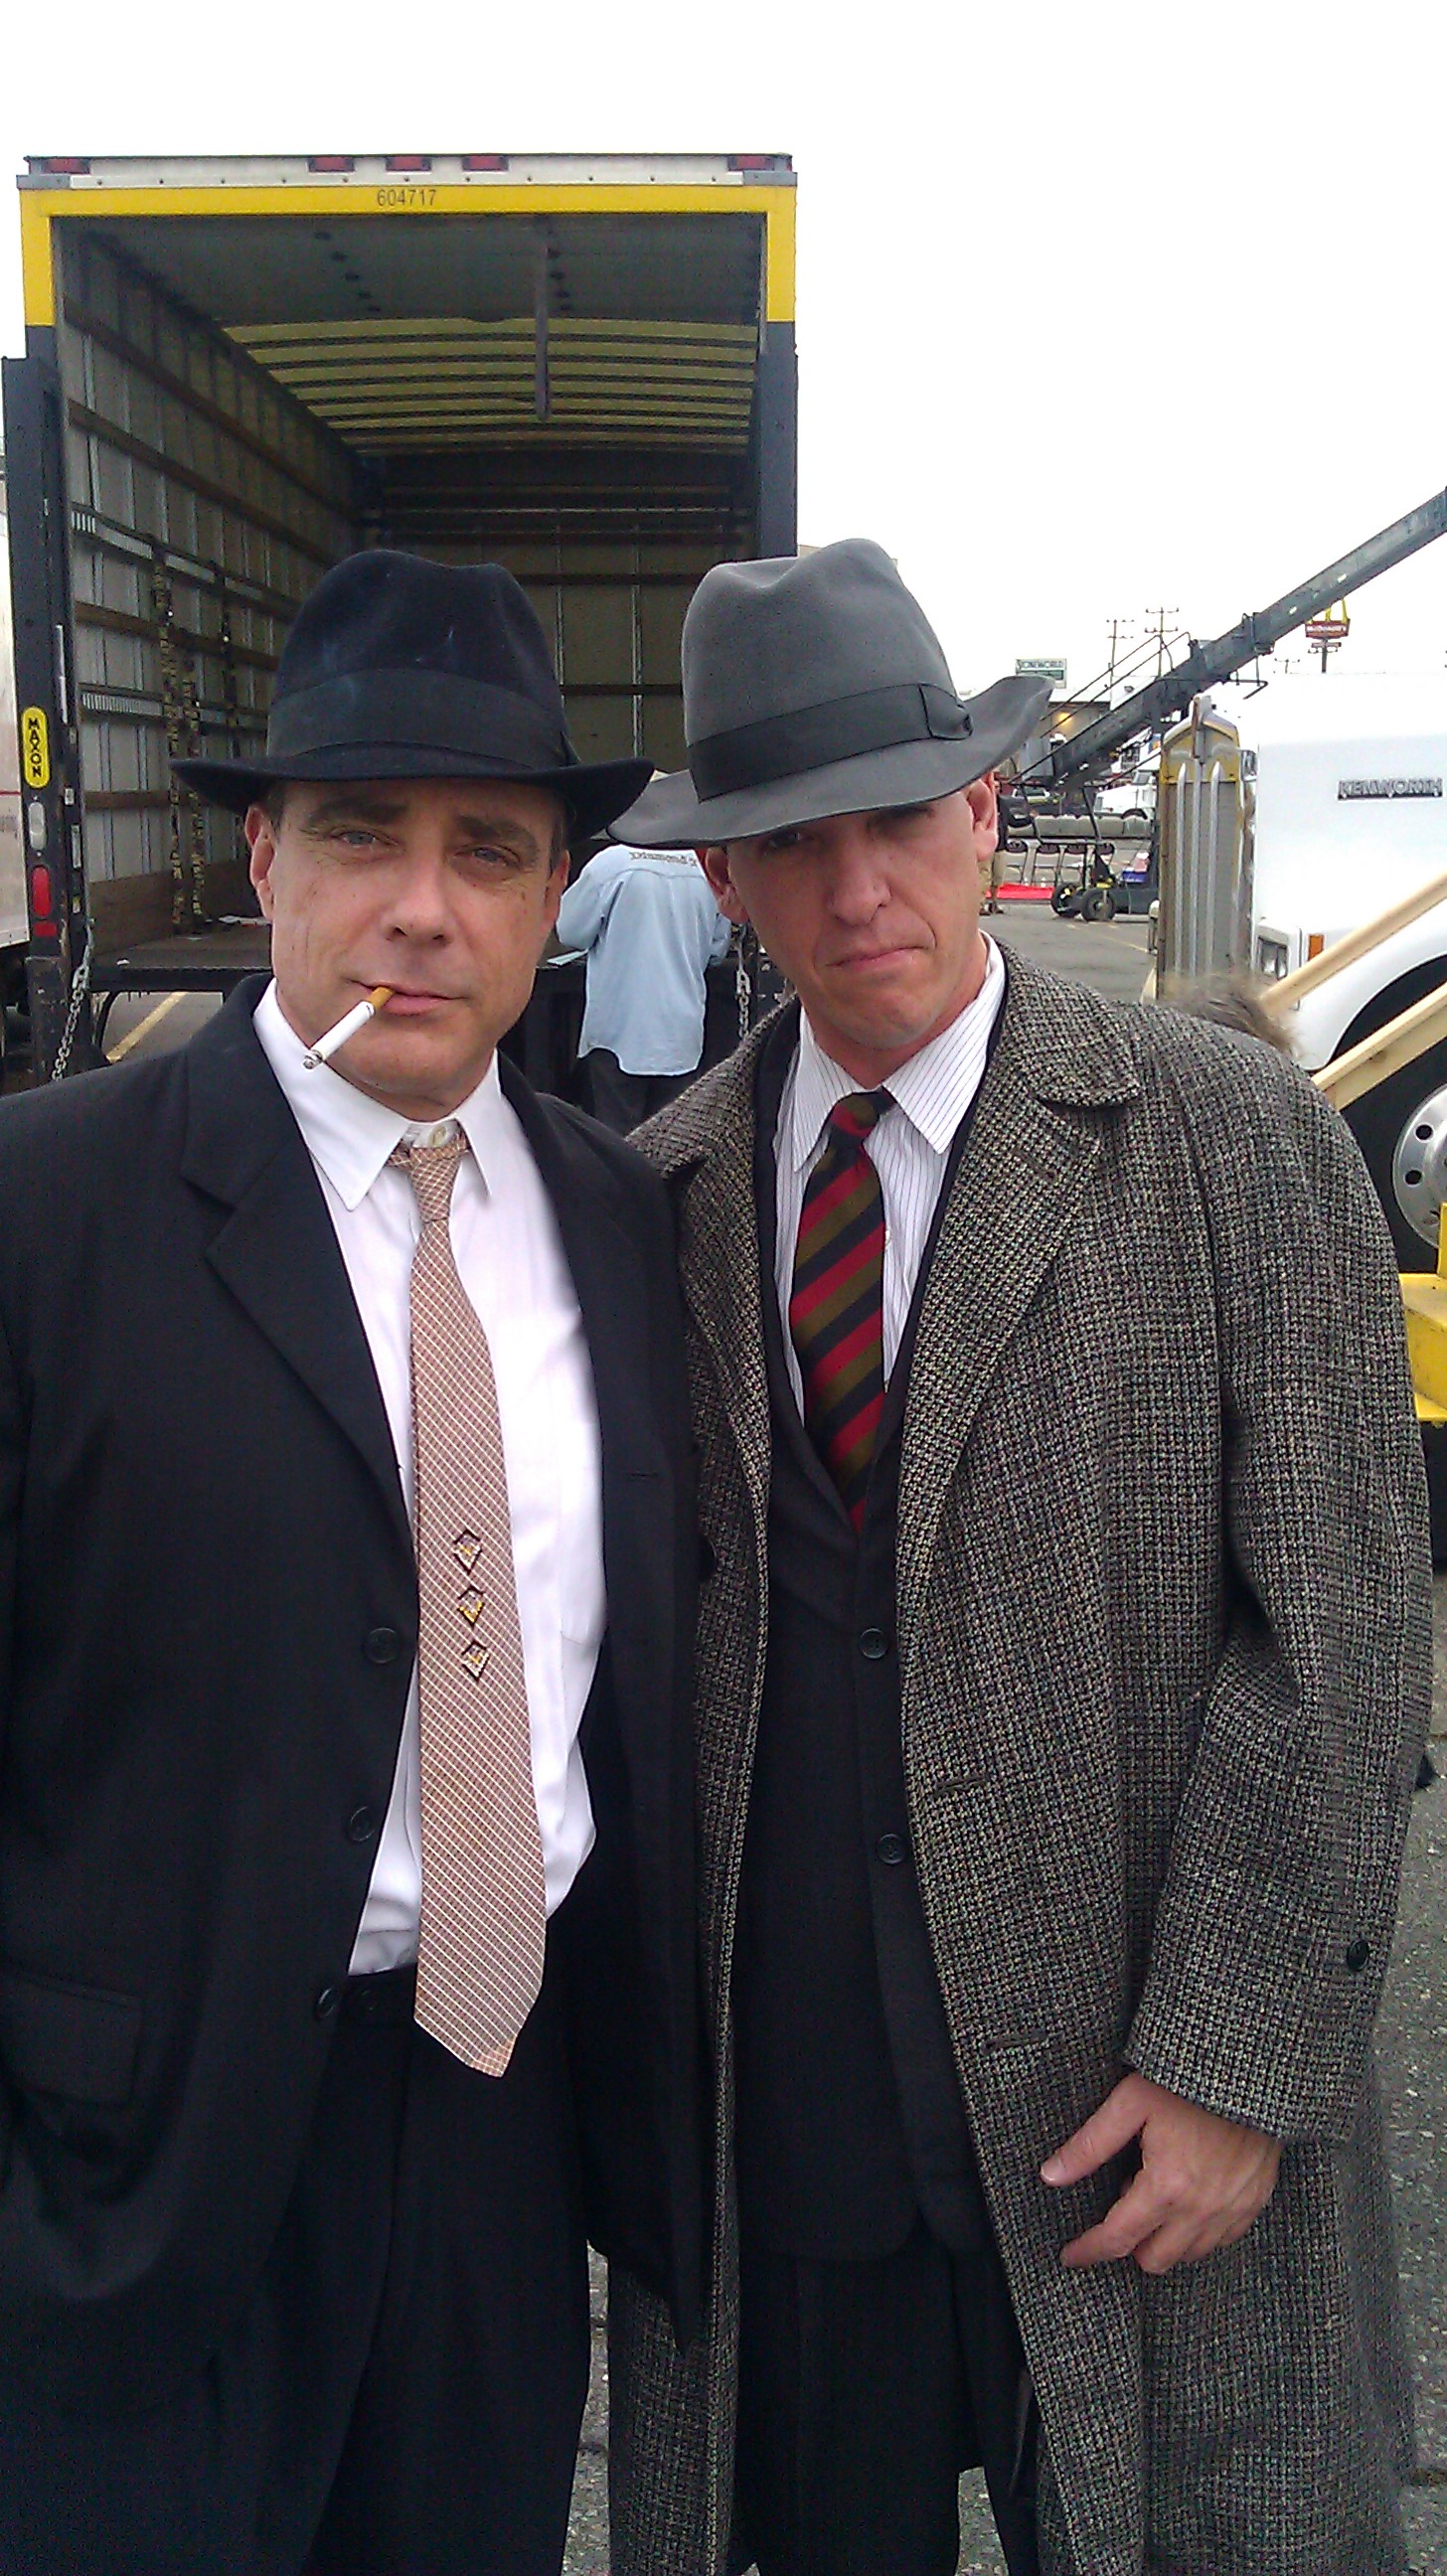 Joseph R. Porter & Mark Wolfers on the set of, The Man in the High Castle